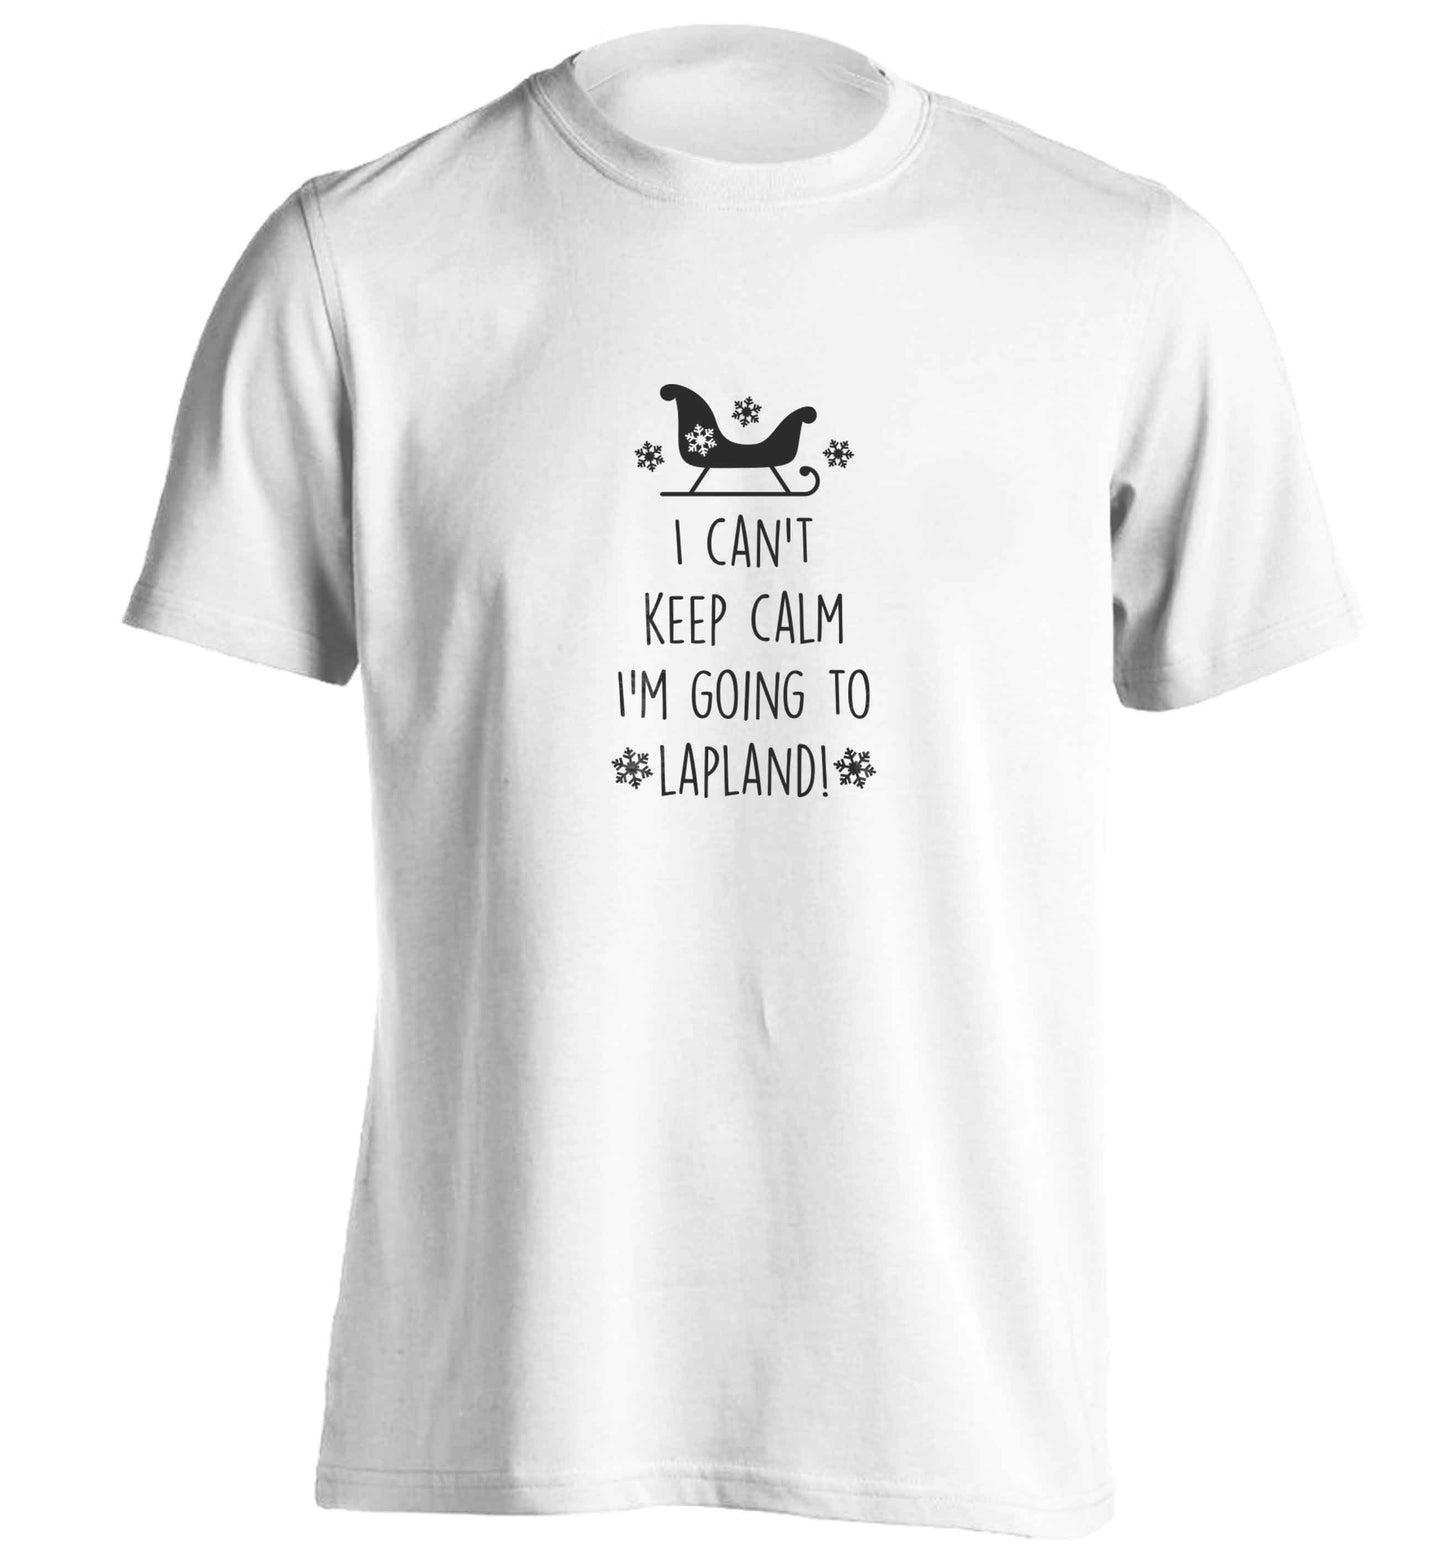 I can't keep calm I'm going to Lapland adults unisex white Tshirt 2XL